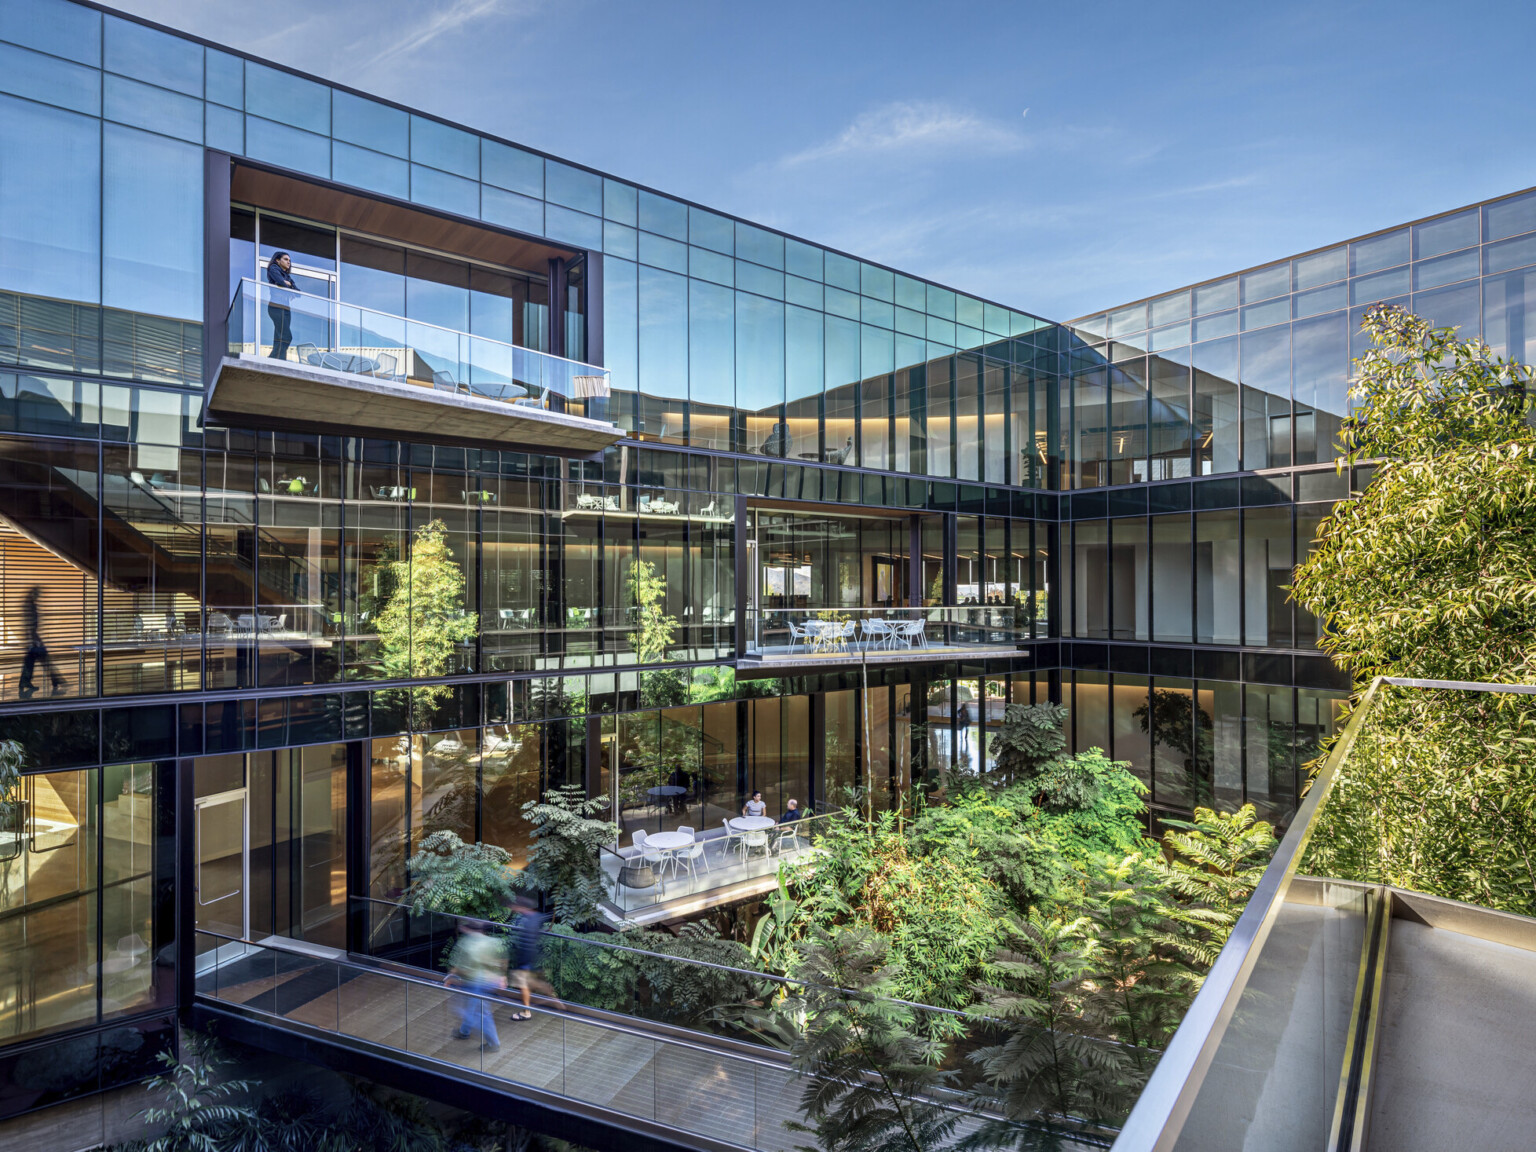 ESRI office workplace design with glass facade and biophilia greenery